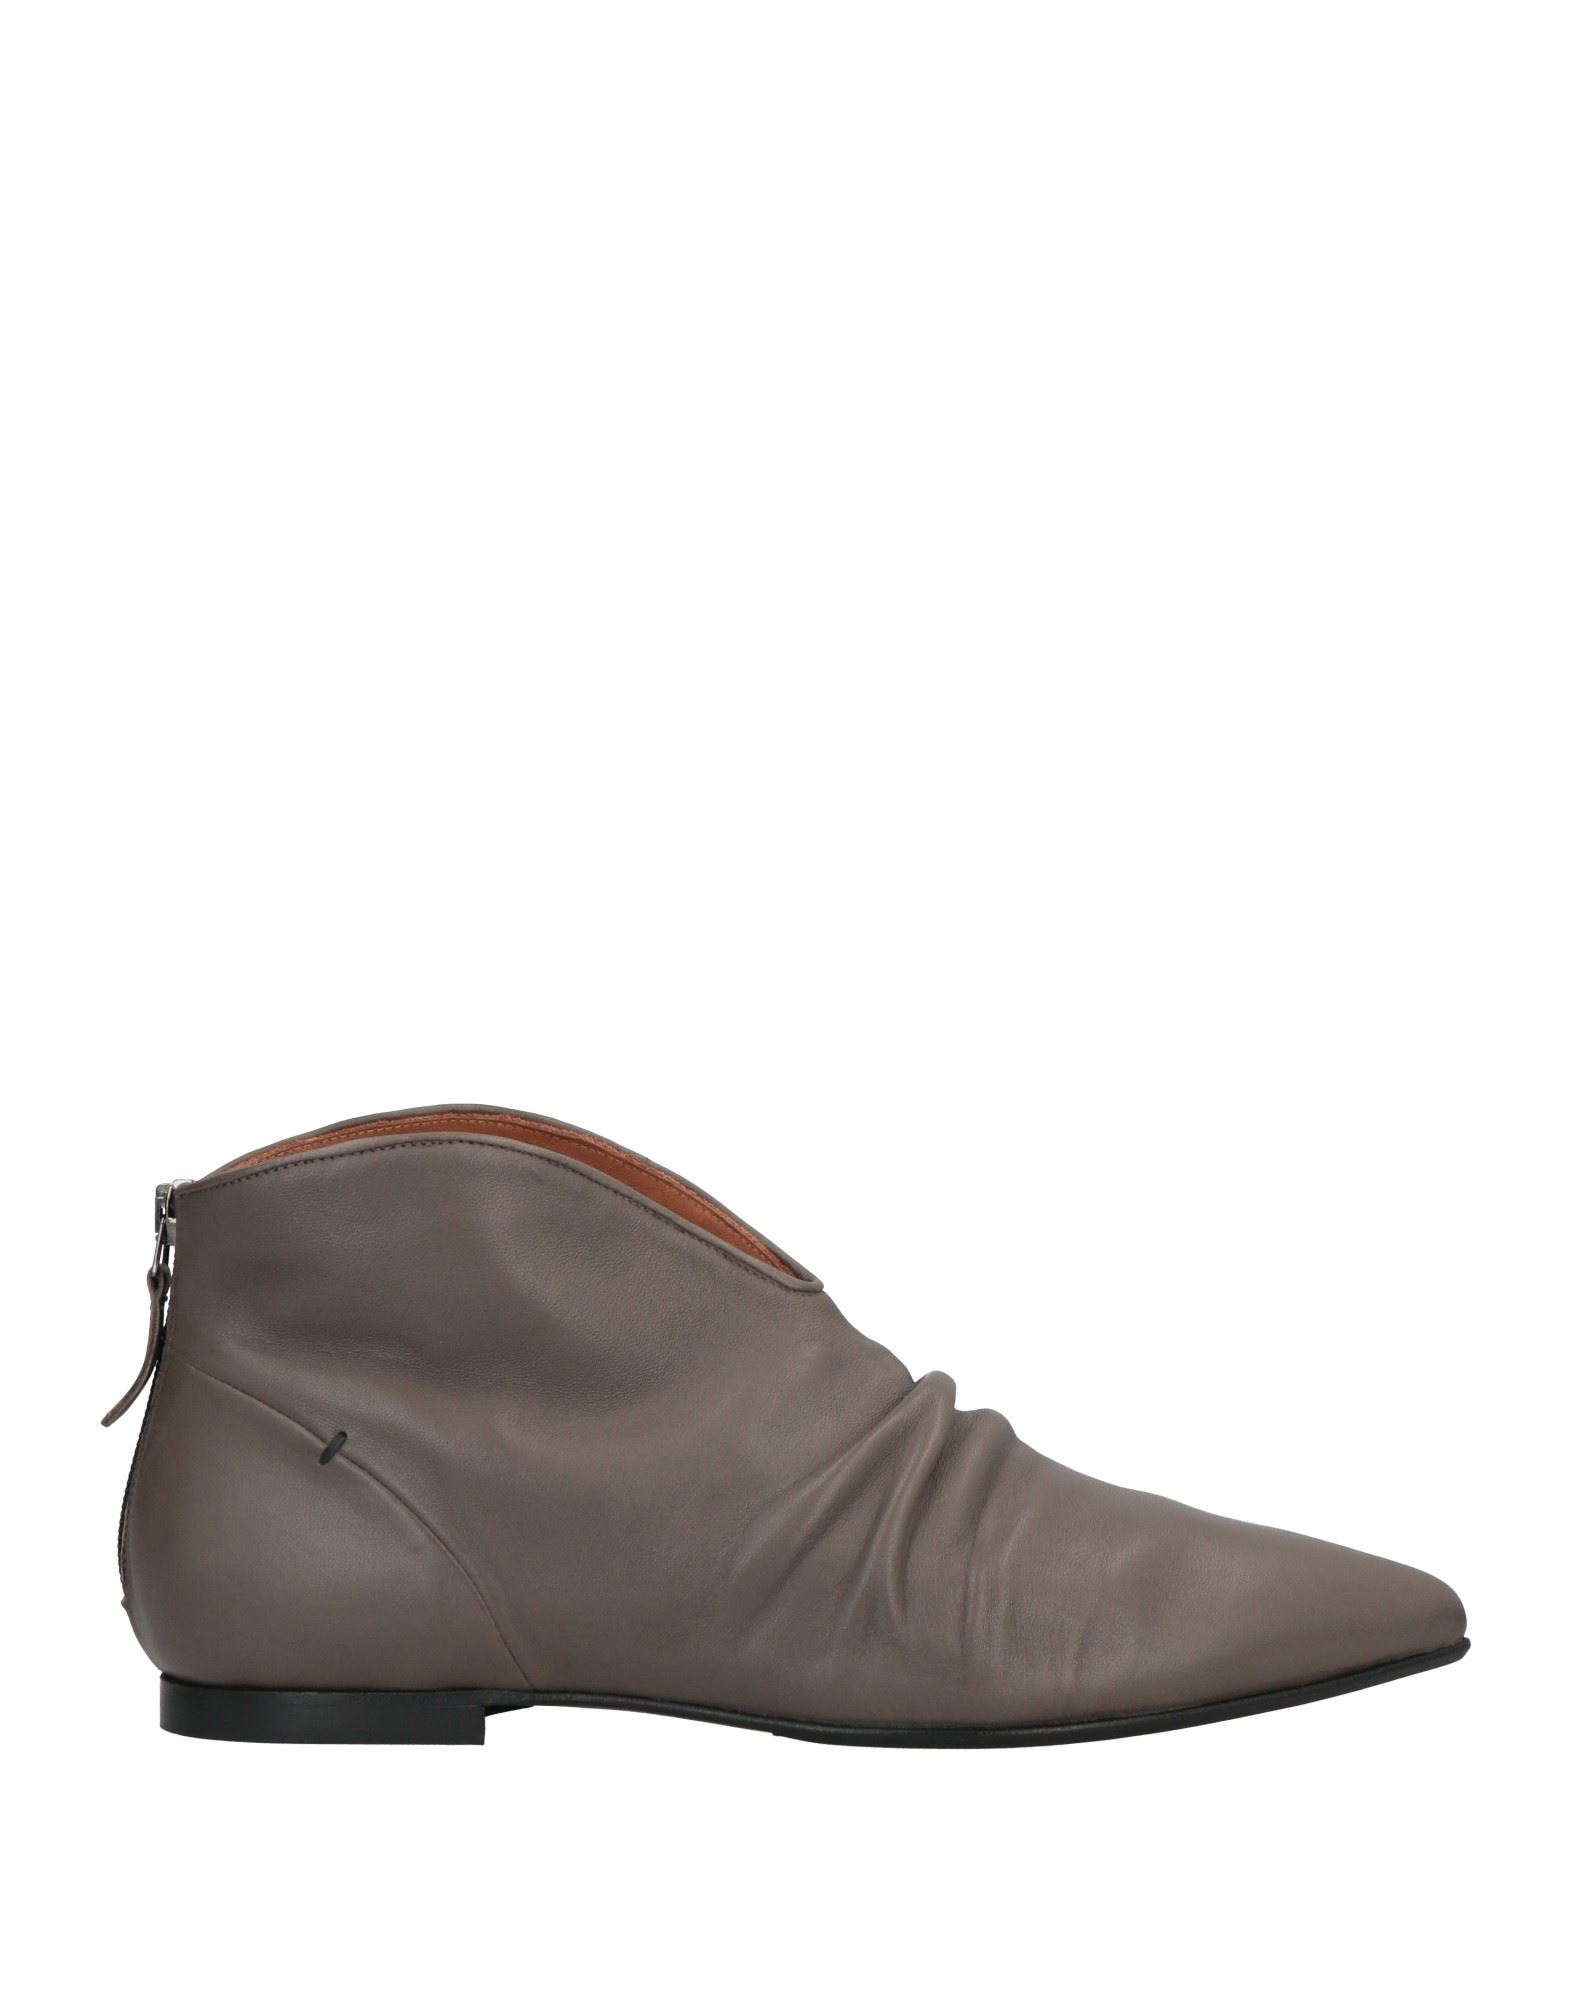 Riccardo Cartillone Ankle Boots In Khaki